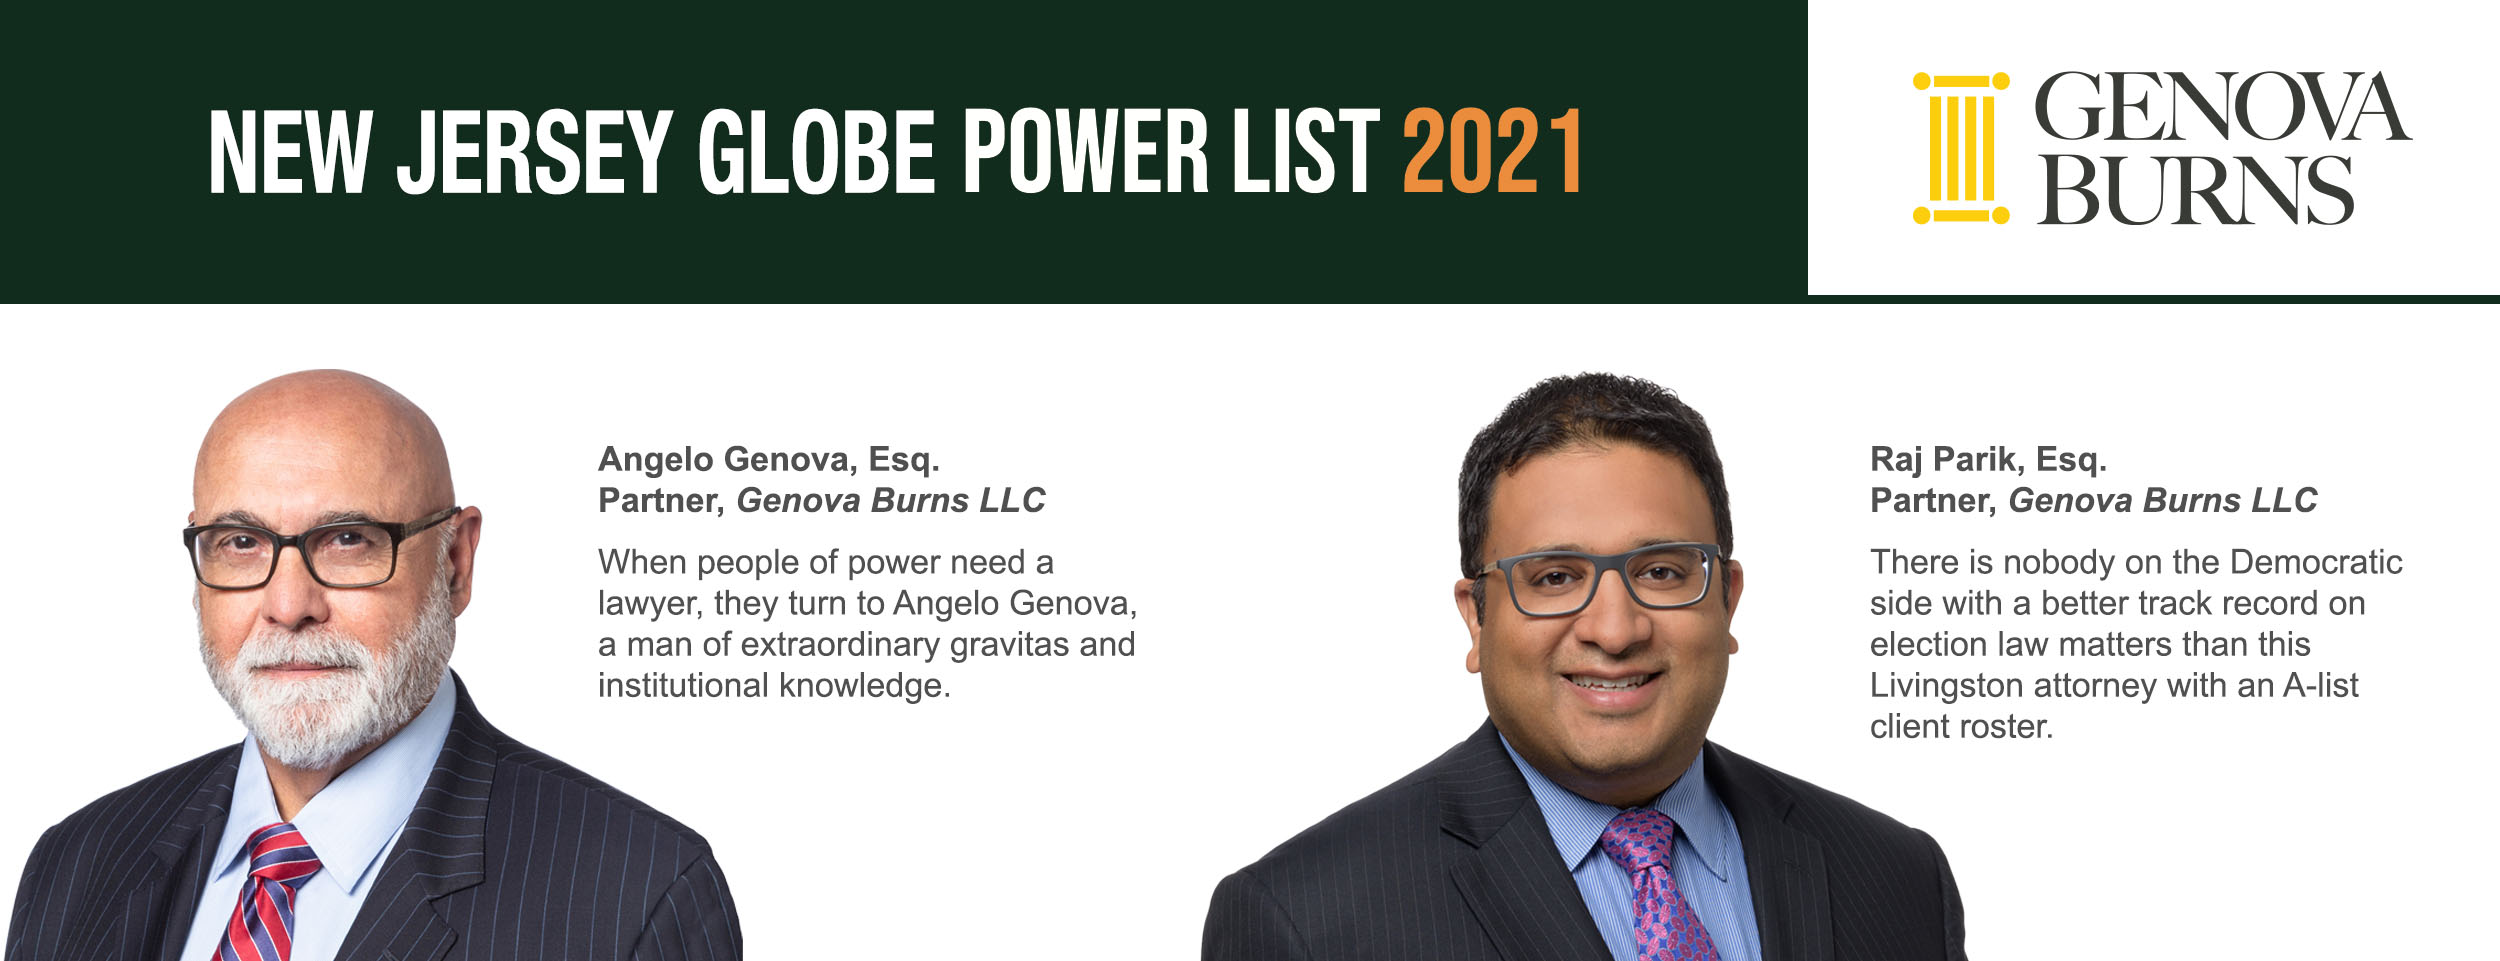 Angelo Genova and Rajiv Parikh Once Again Named to New Jersey Globe Annual Power List